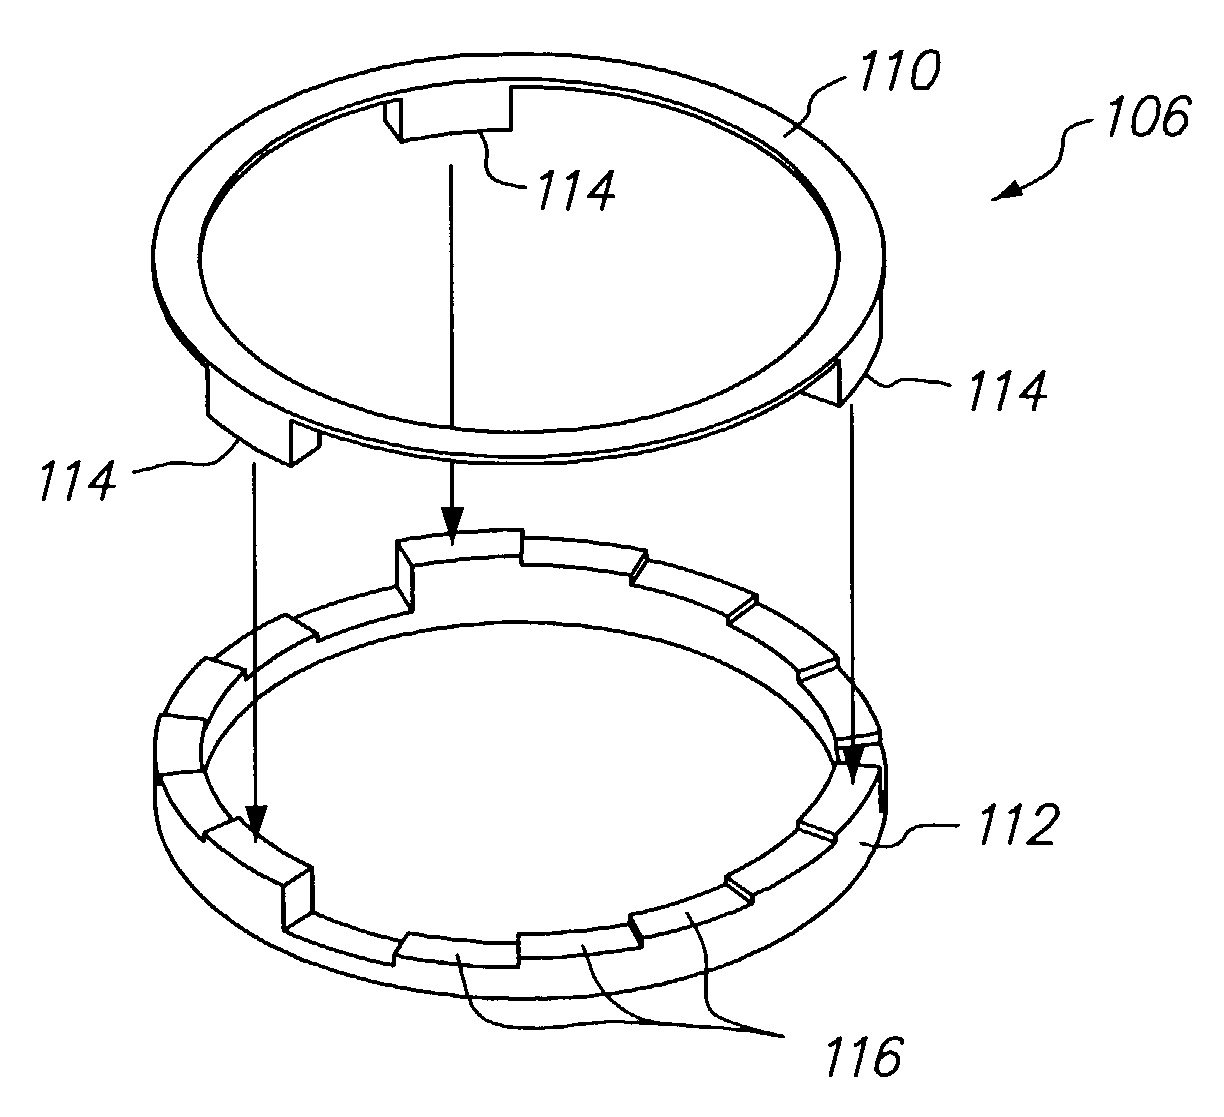 Apparatus for reducing polymer deposition on a substrate and substrate support